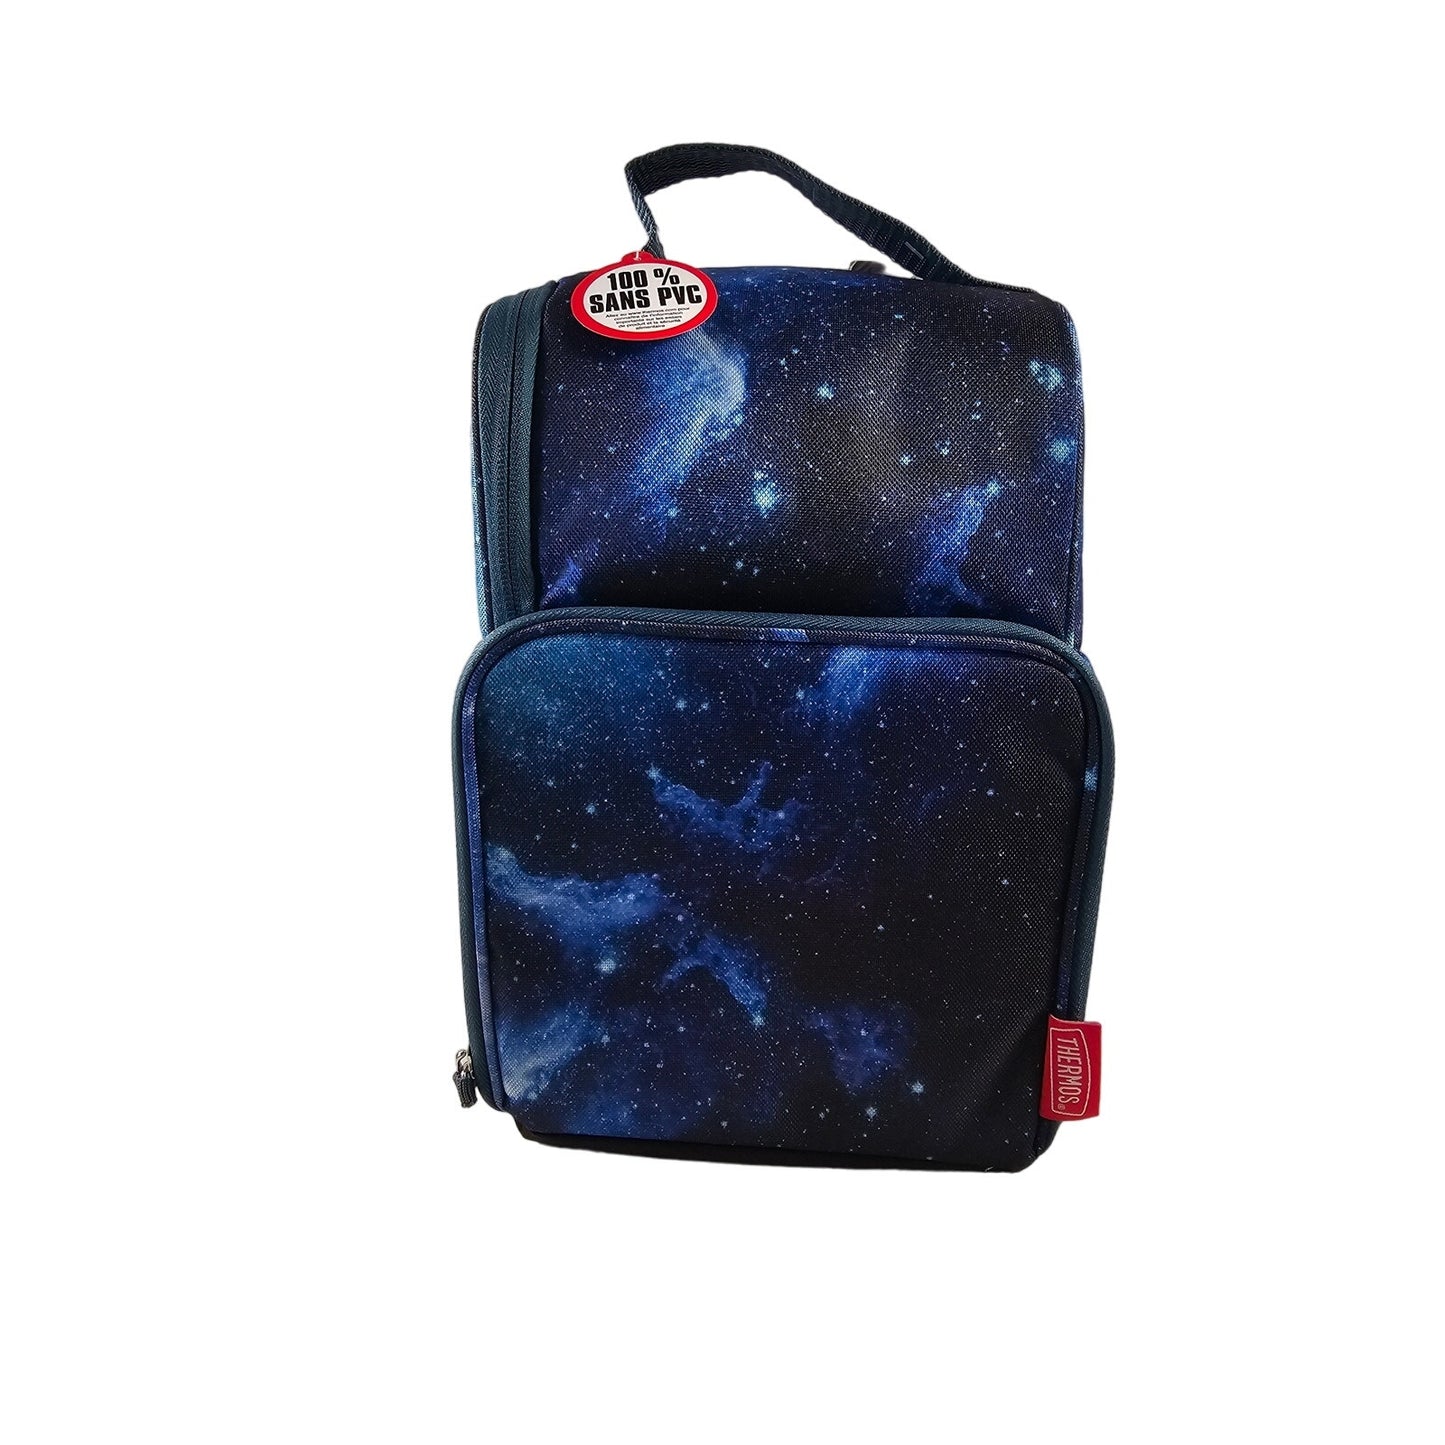 THERMOS DUAL COMPARTMENT LUNCH BOX, GALAXY TEAL